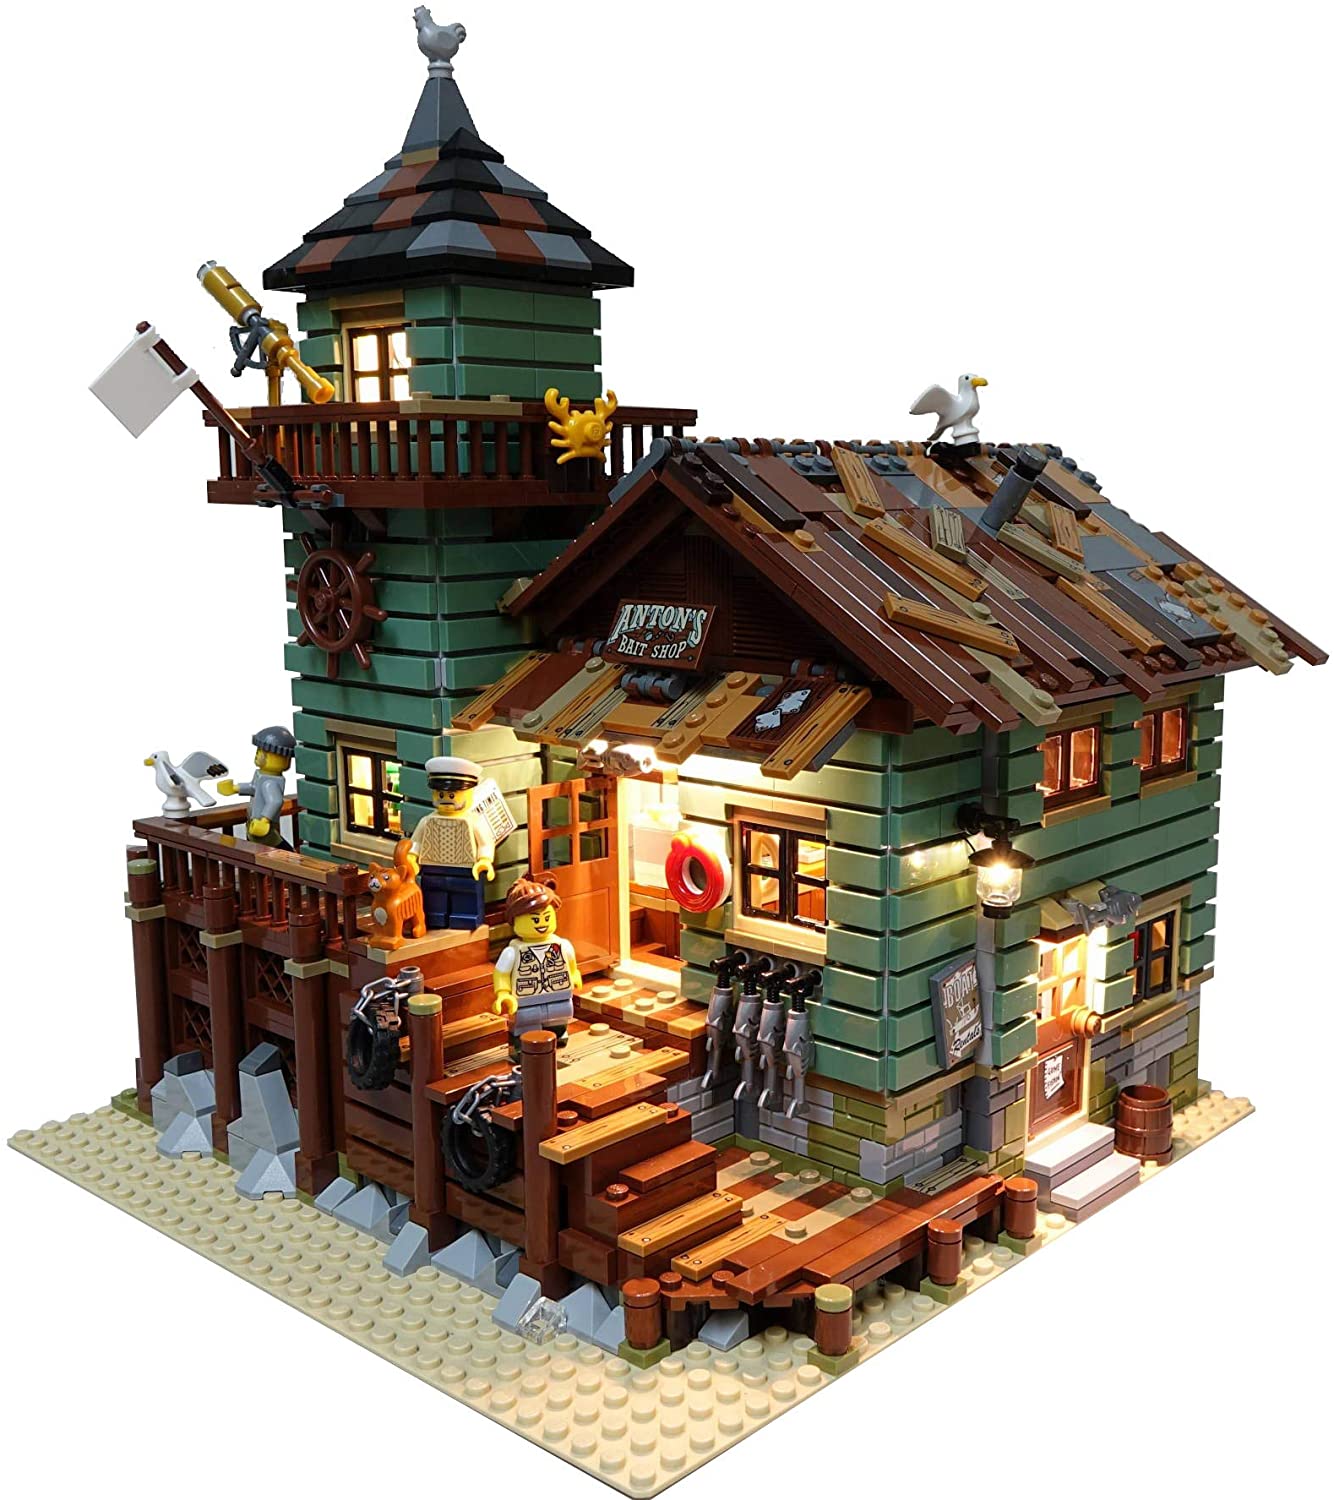 Brick Loot Led Lighting Kit For Old Fishing Store – 21310 Set Not Included  – Homefurniturelife Online Store